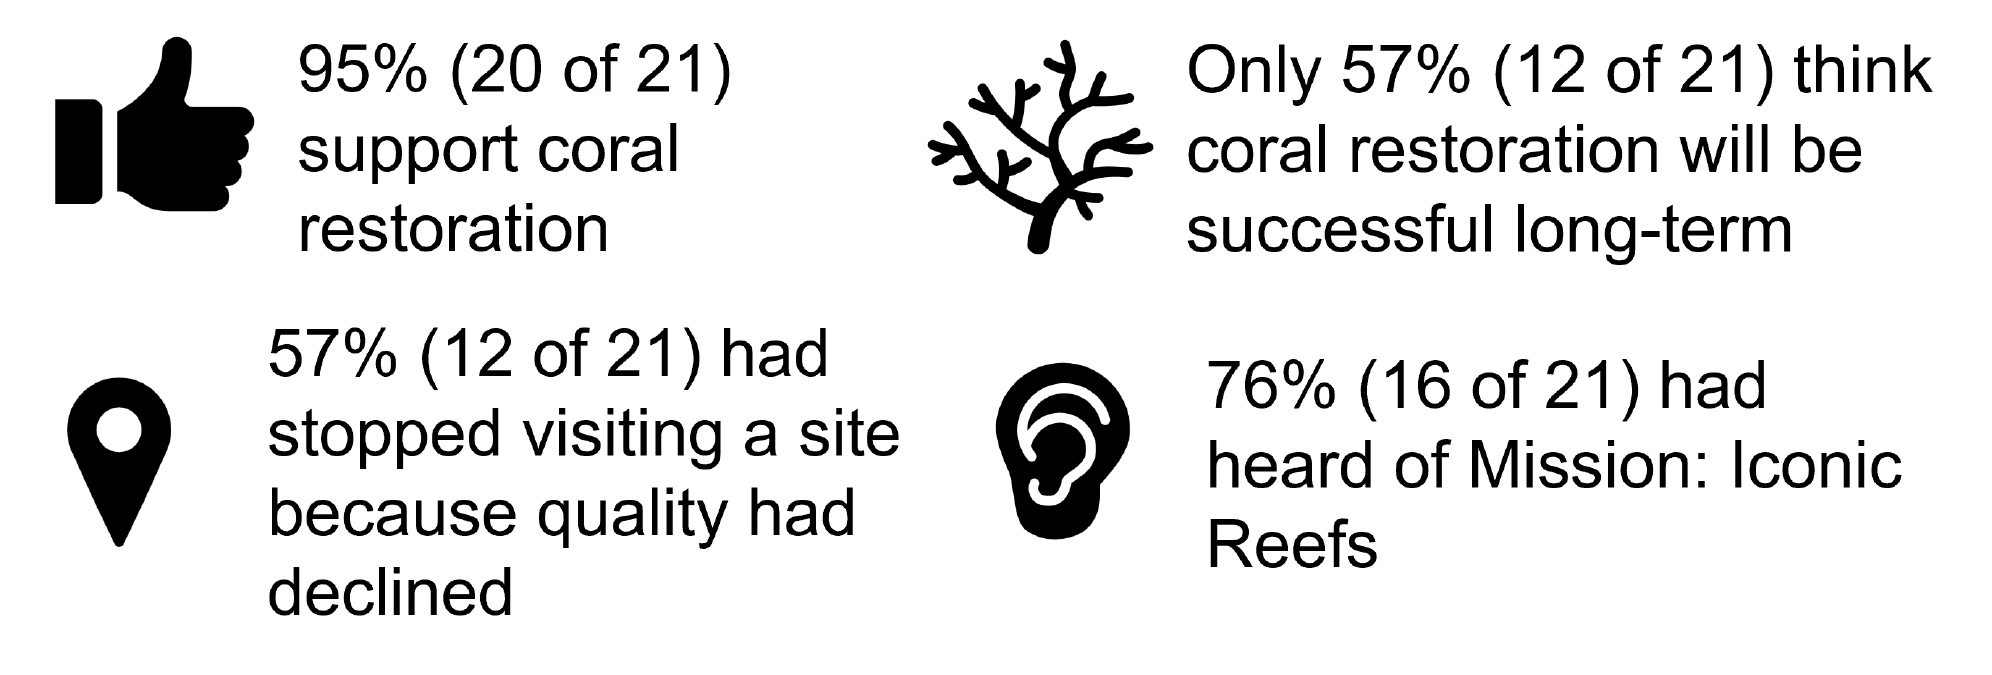 An infographic displaying icons of a thumbs up, map location, branching coral, and ear next to statistics on coral reef restoration. 